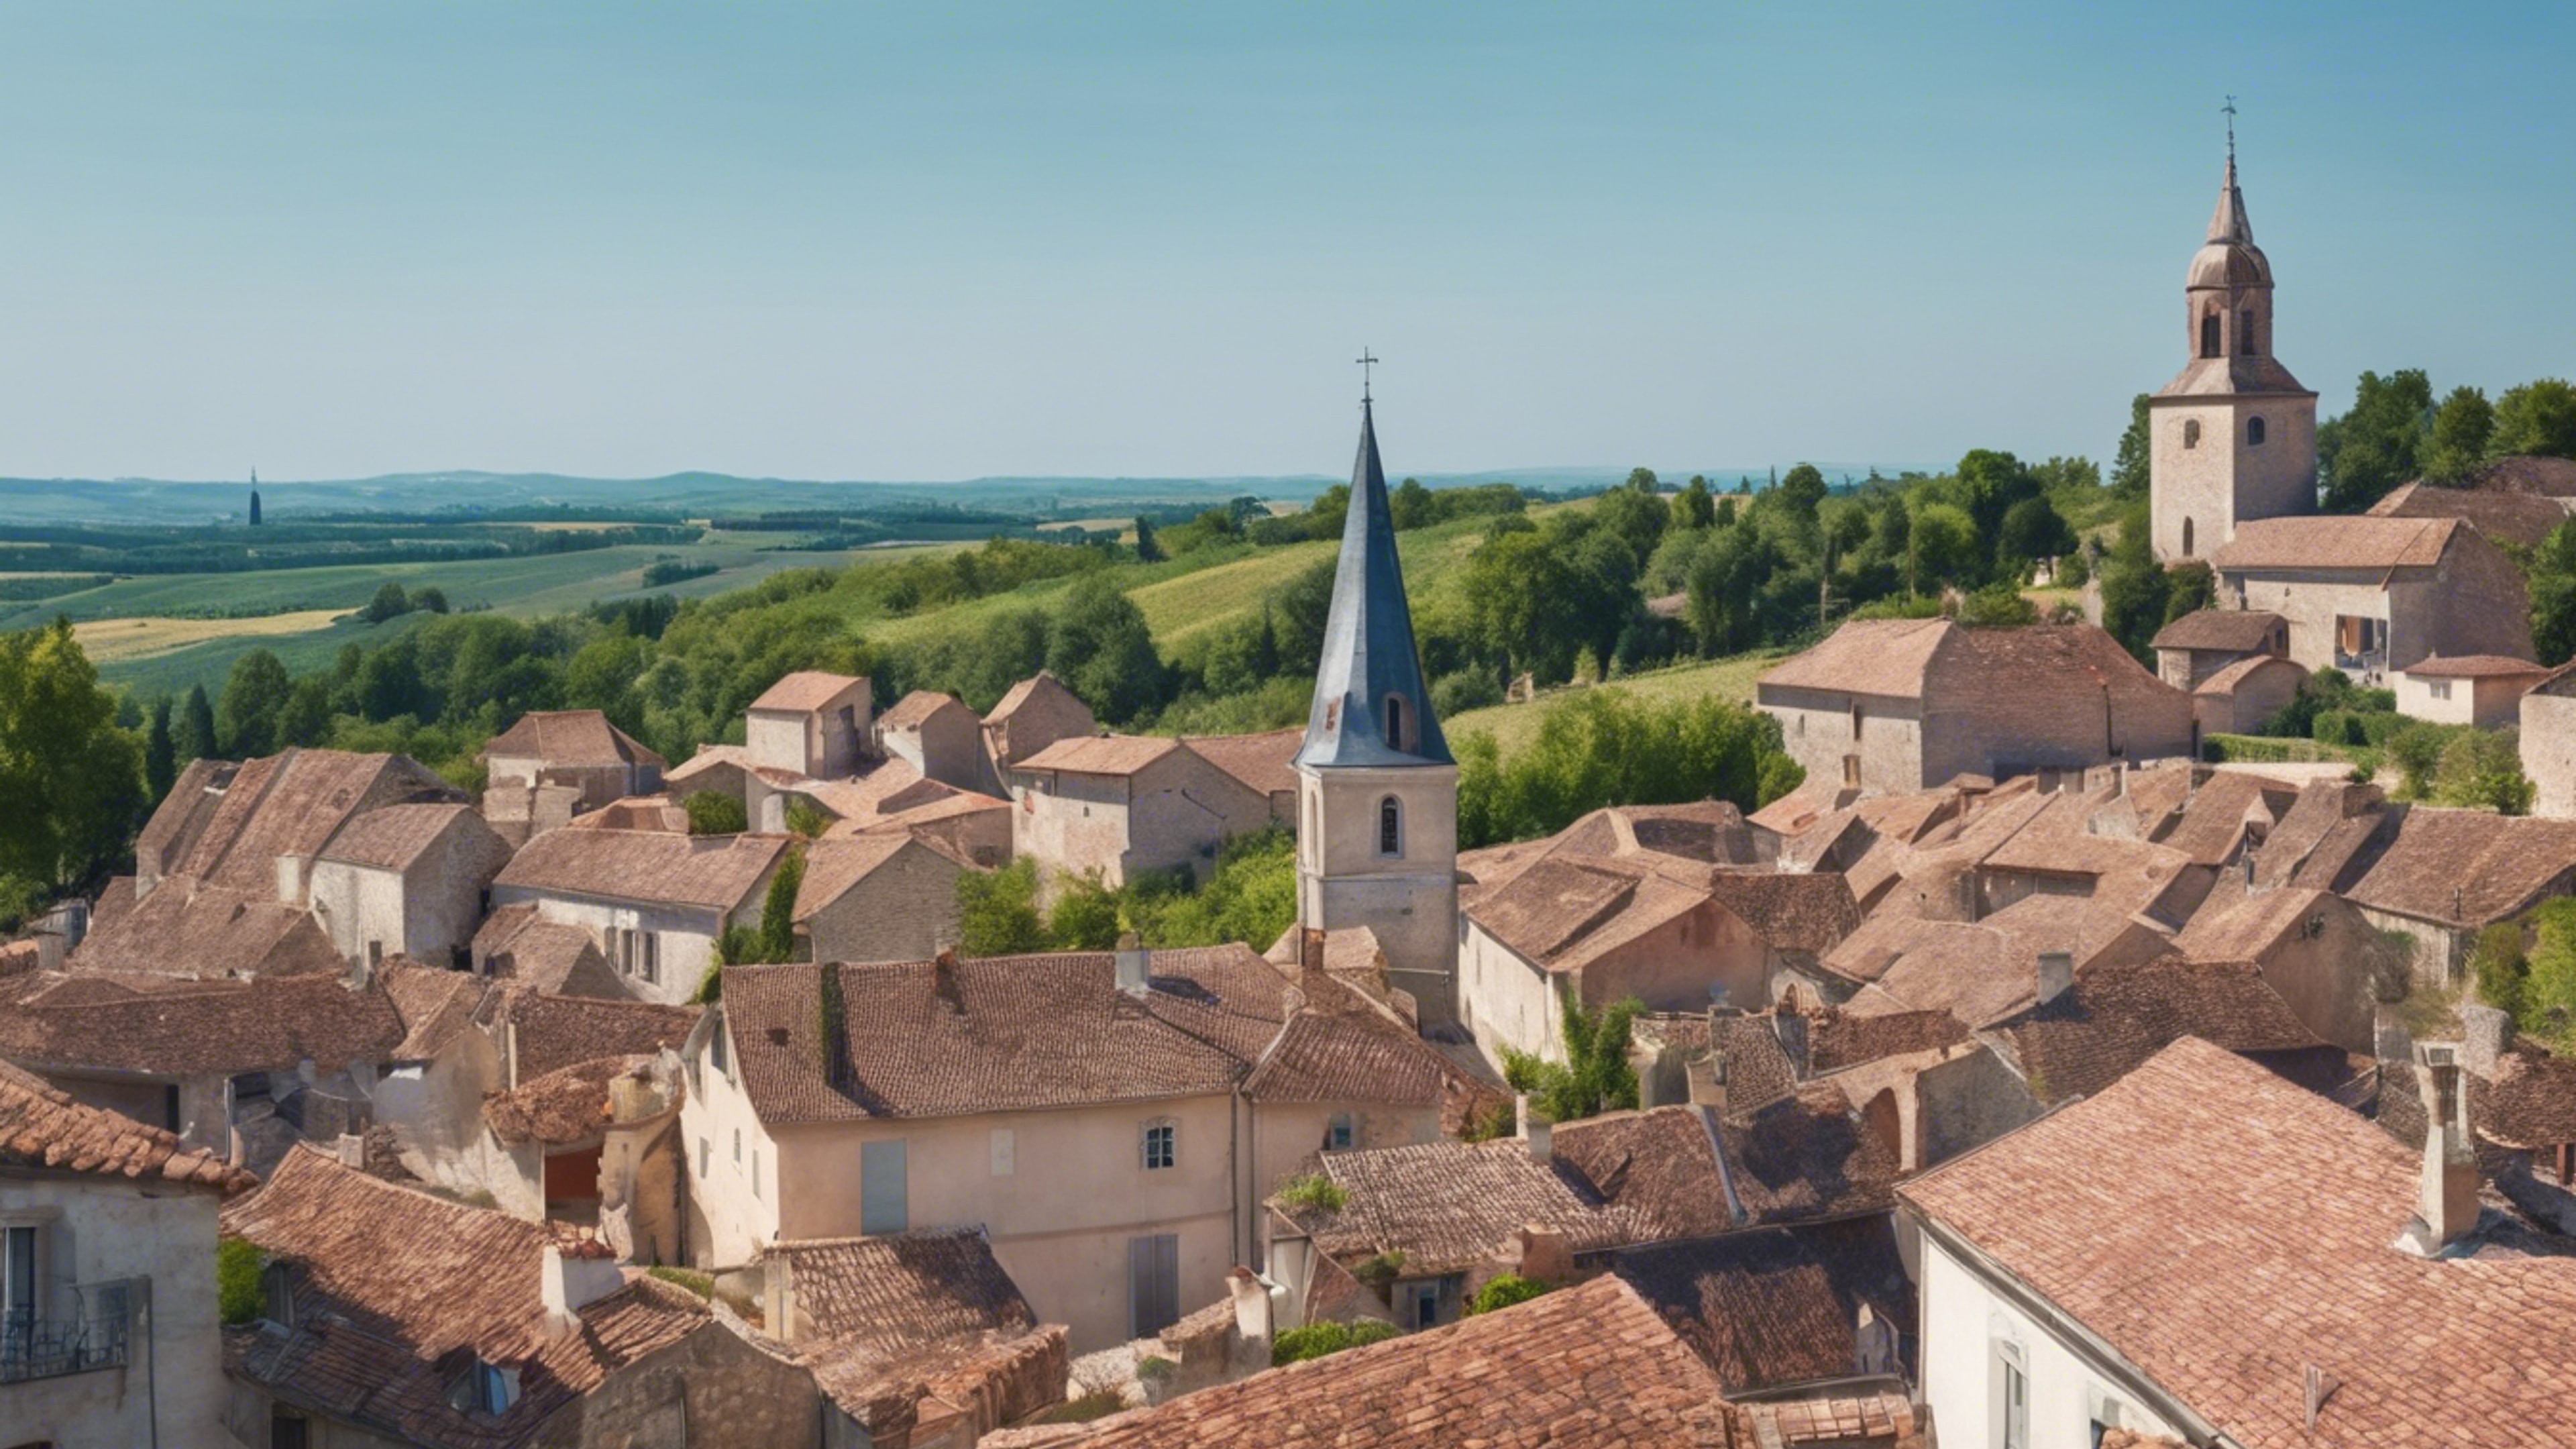 A panoramic view of a French country village with red-tiled roofs, a church spire, and surrounding vineyards under a clear blue sky. Tapeta[29c4a00e876546cab0f2]